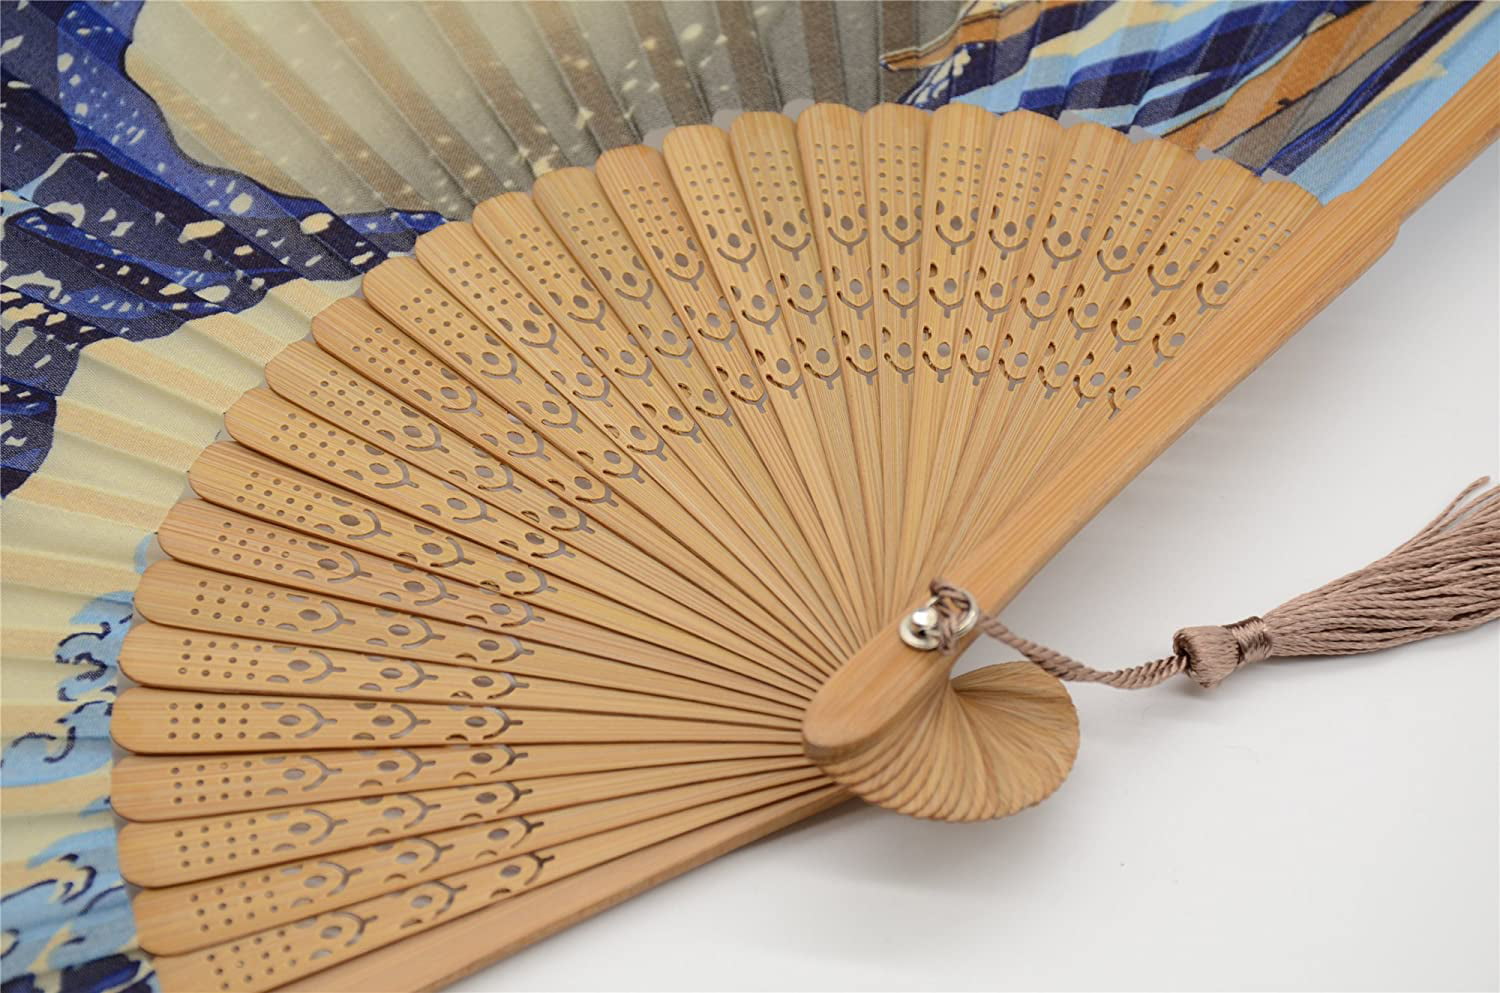 Folding Hand Held Fan Kanagawa Sea Waves Landscape 8.27 21cm with a Fabric Sleeve for Protection for Gifts Japanese Vintage Retro Style